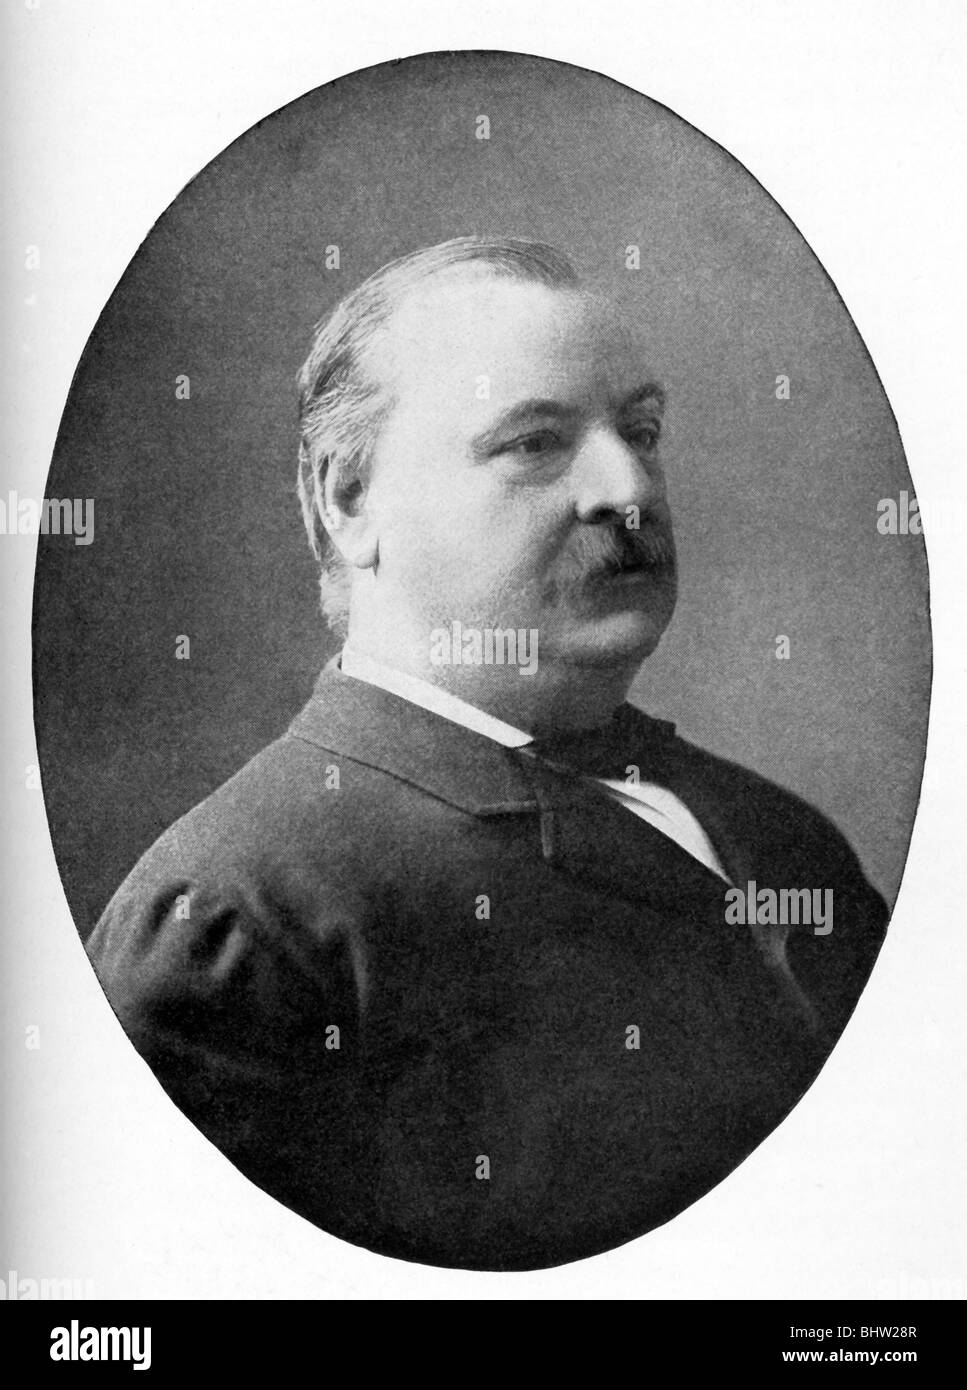 Grover Cleveland (1837-1908) served as the 22nd and 24th president of the United States (1885-1889 and 1893-1897). Stock Photo